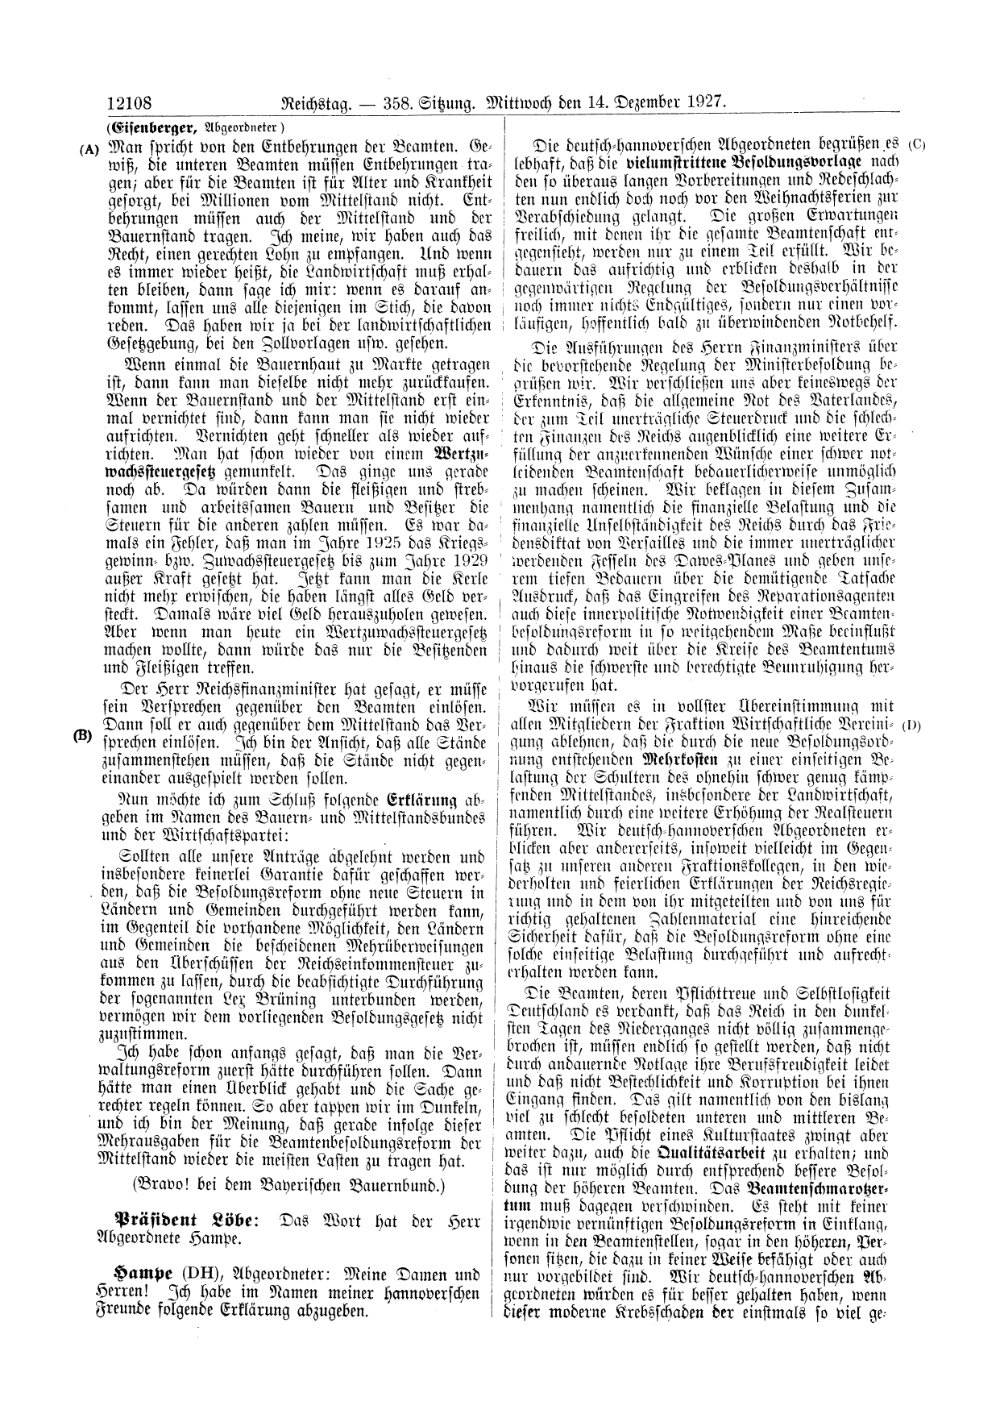 Scan of page 12108